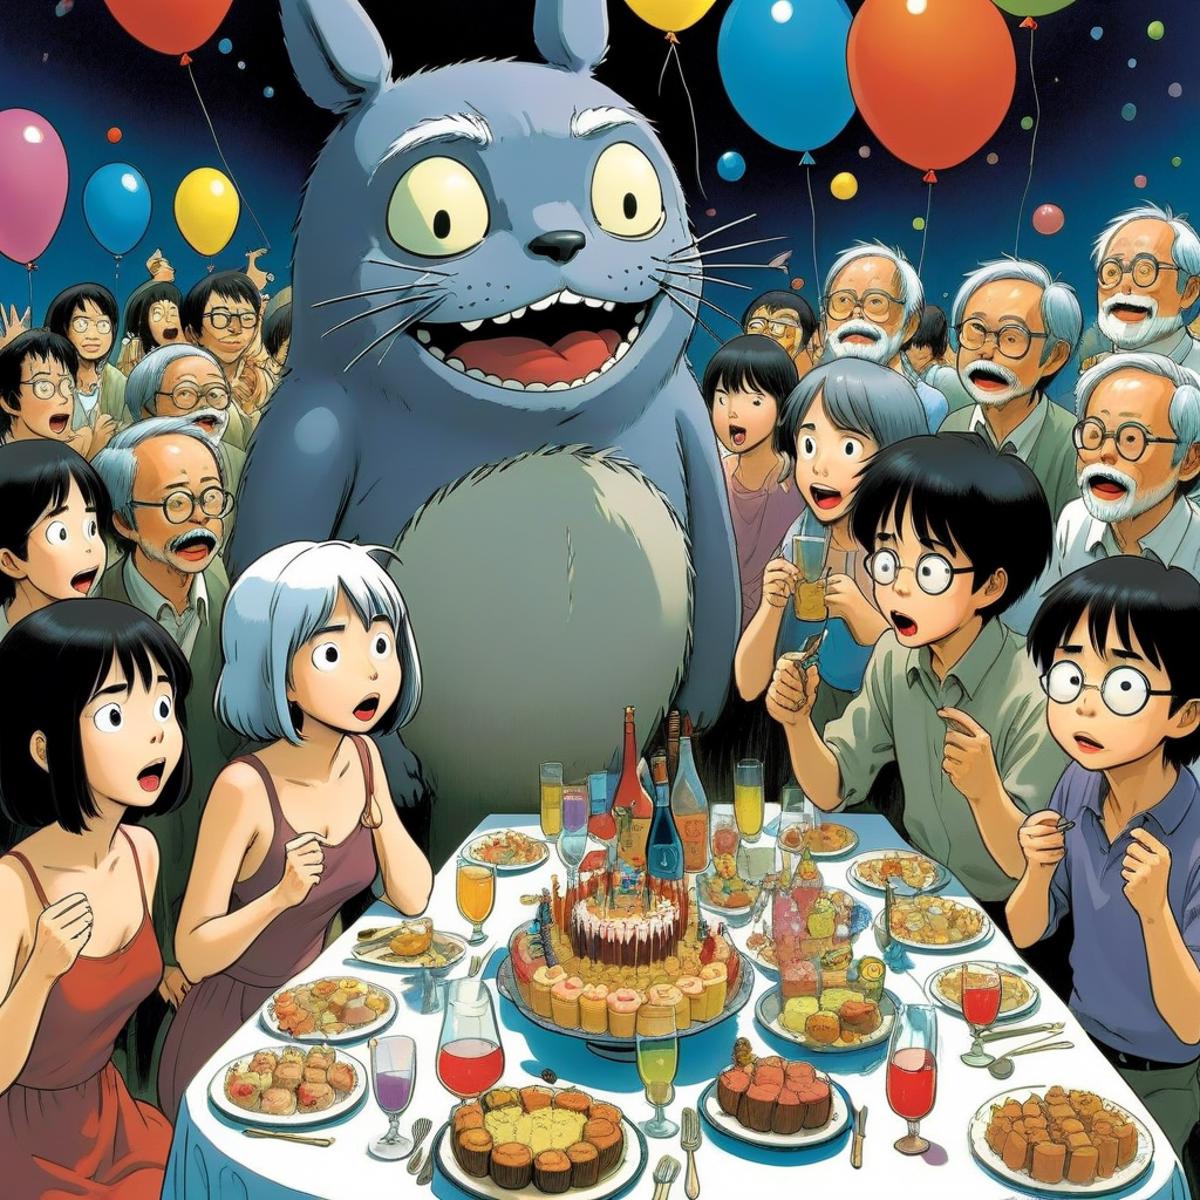 A large cat with a big smile on a table with a cake surrounded by people.